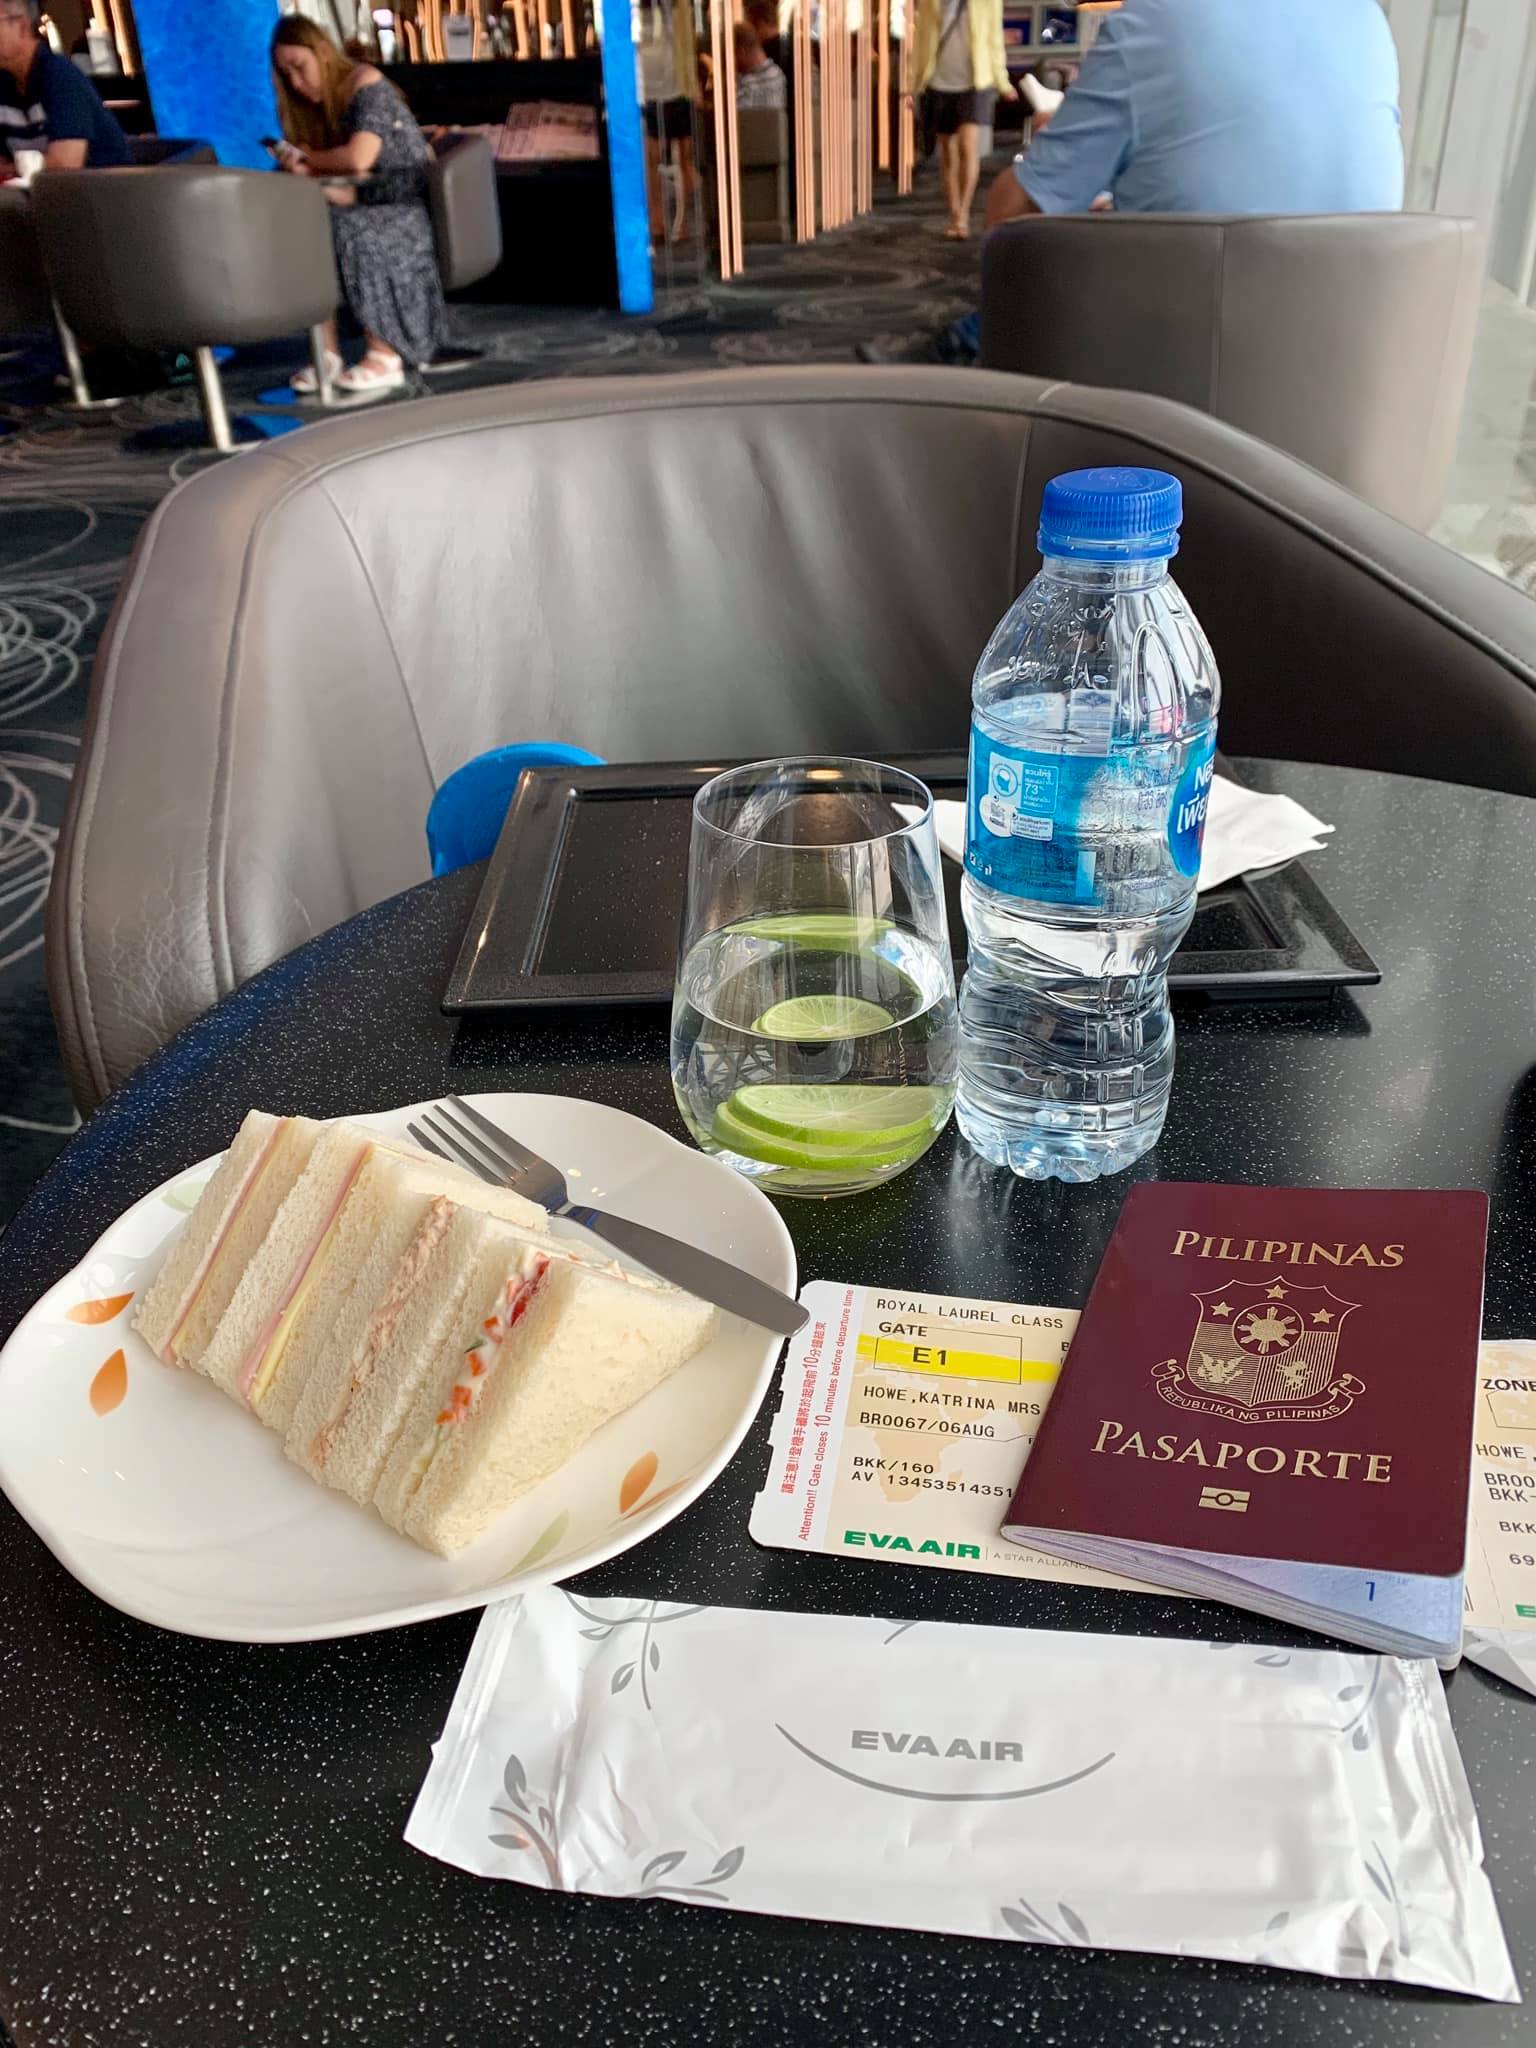 Kach Solo Travels in 2019 Fying Business Class from Bangkok, Thailand to London, UK20.jpg